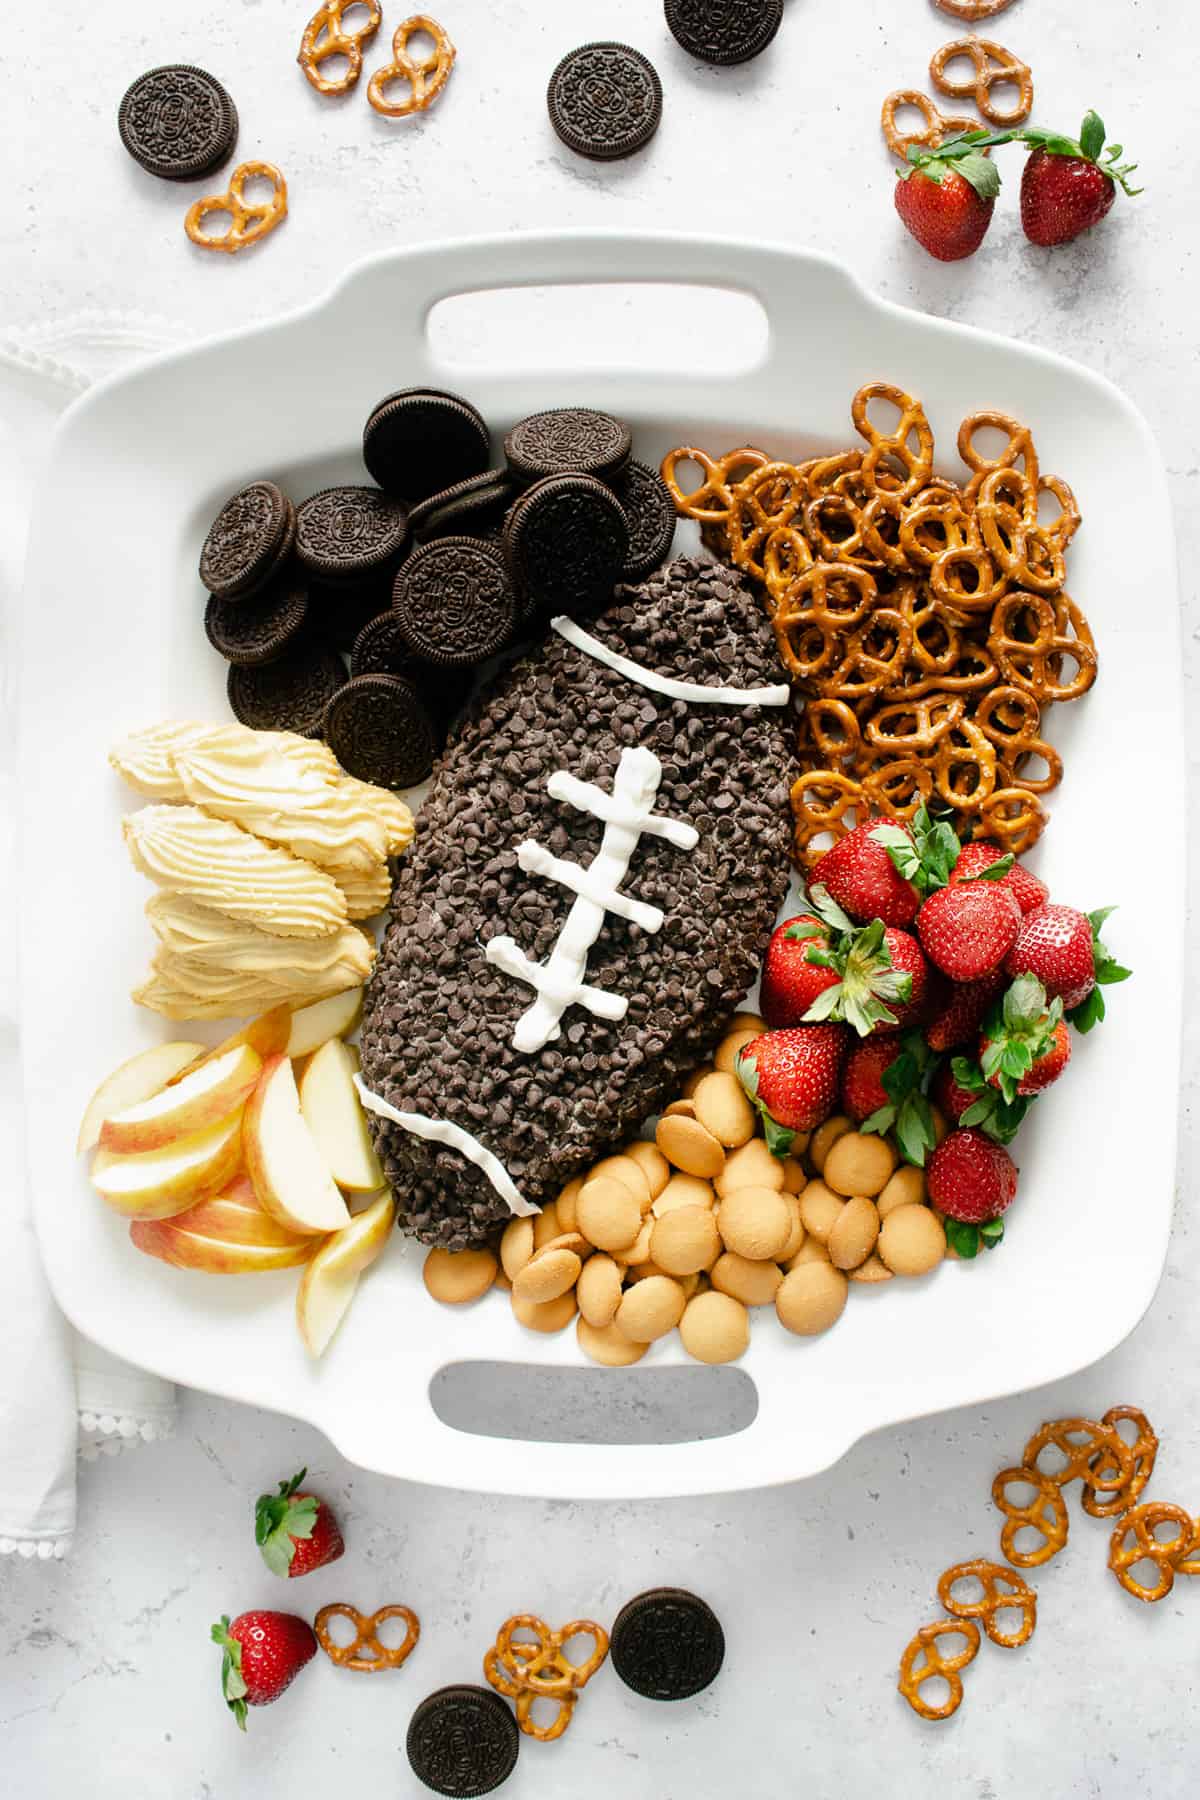 A football shaped dessert cheese ball covered in mini chocolate chips and decorated to look like a football.